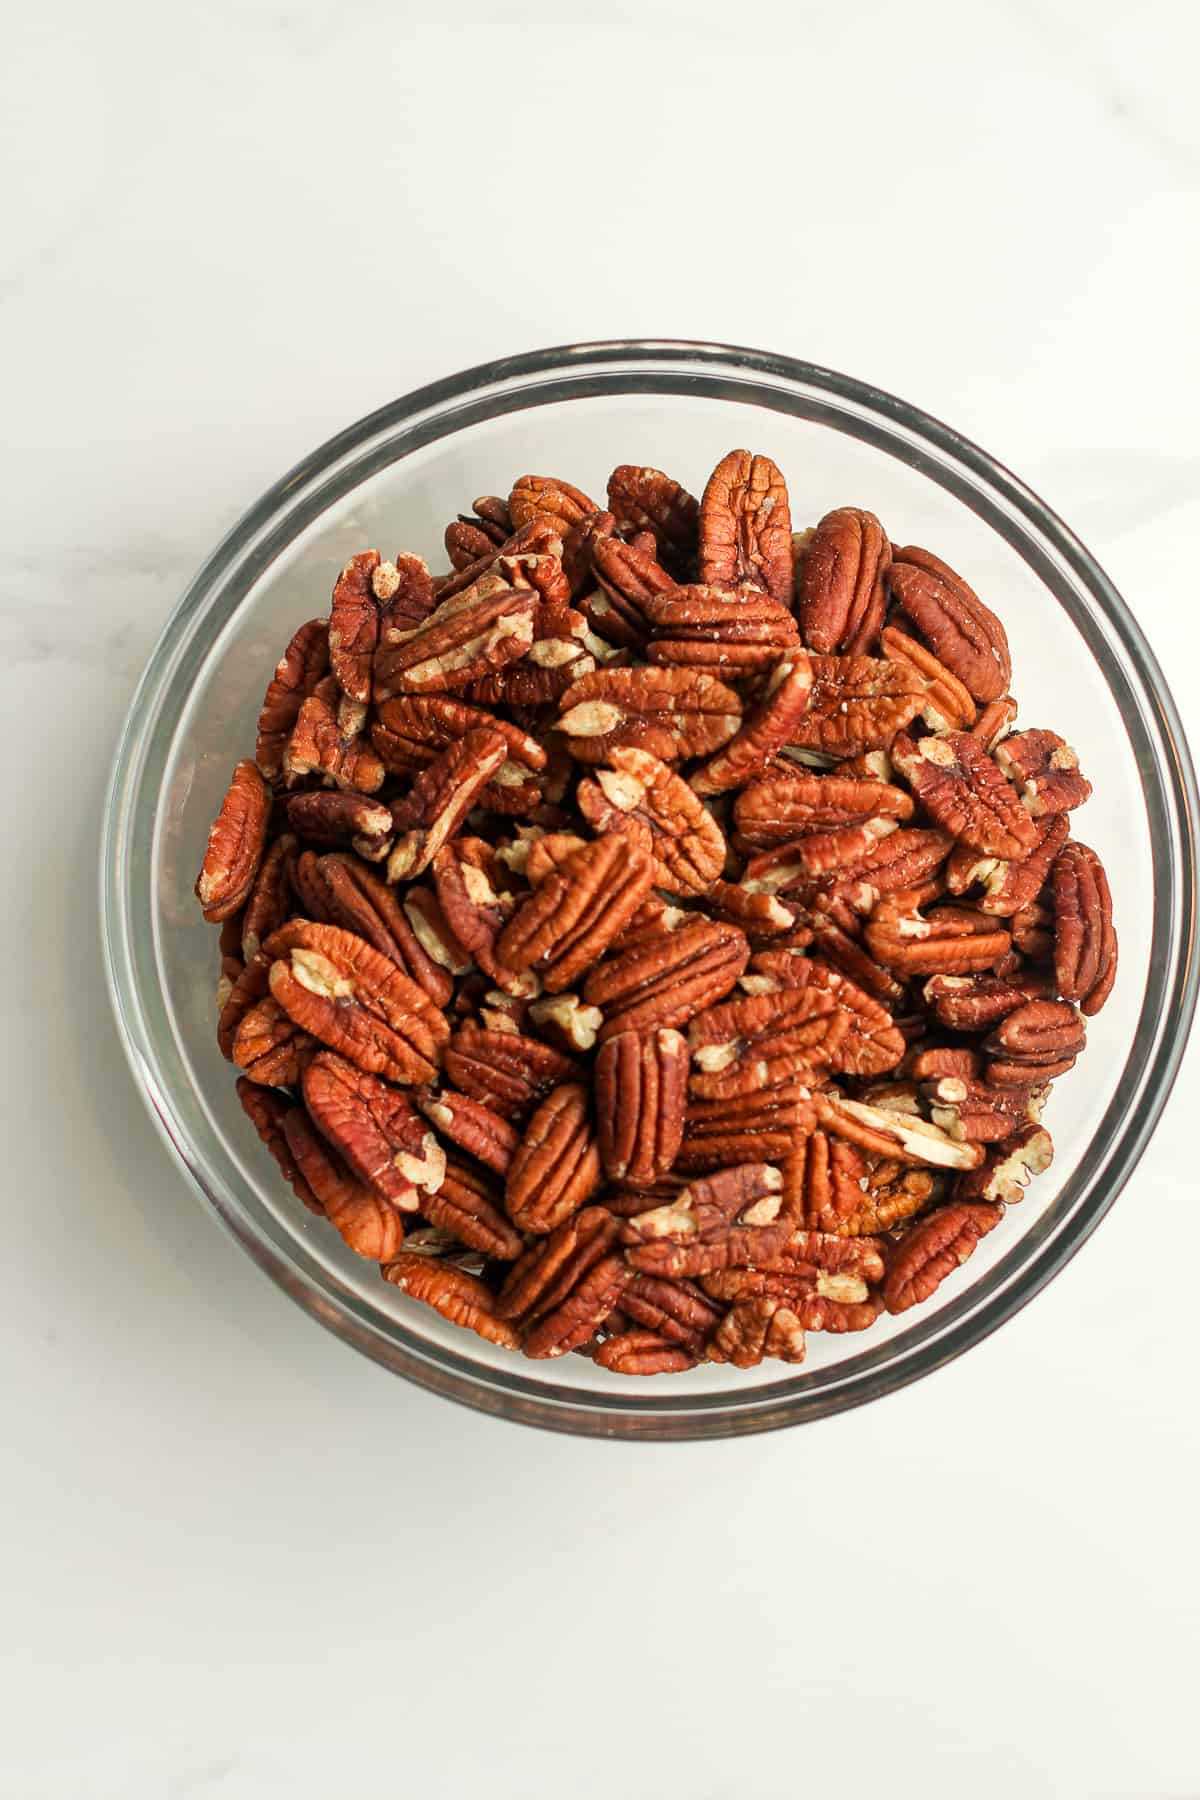 A bowl of the pecans.